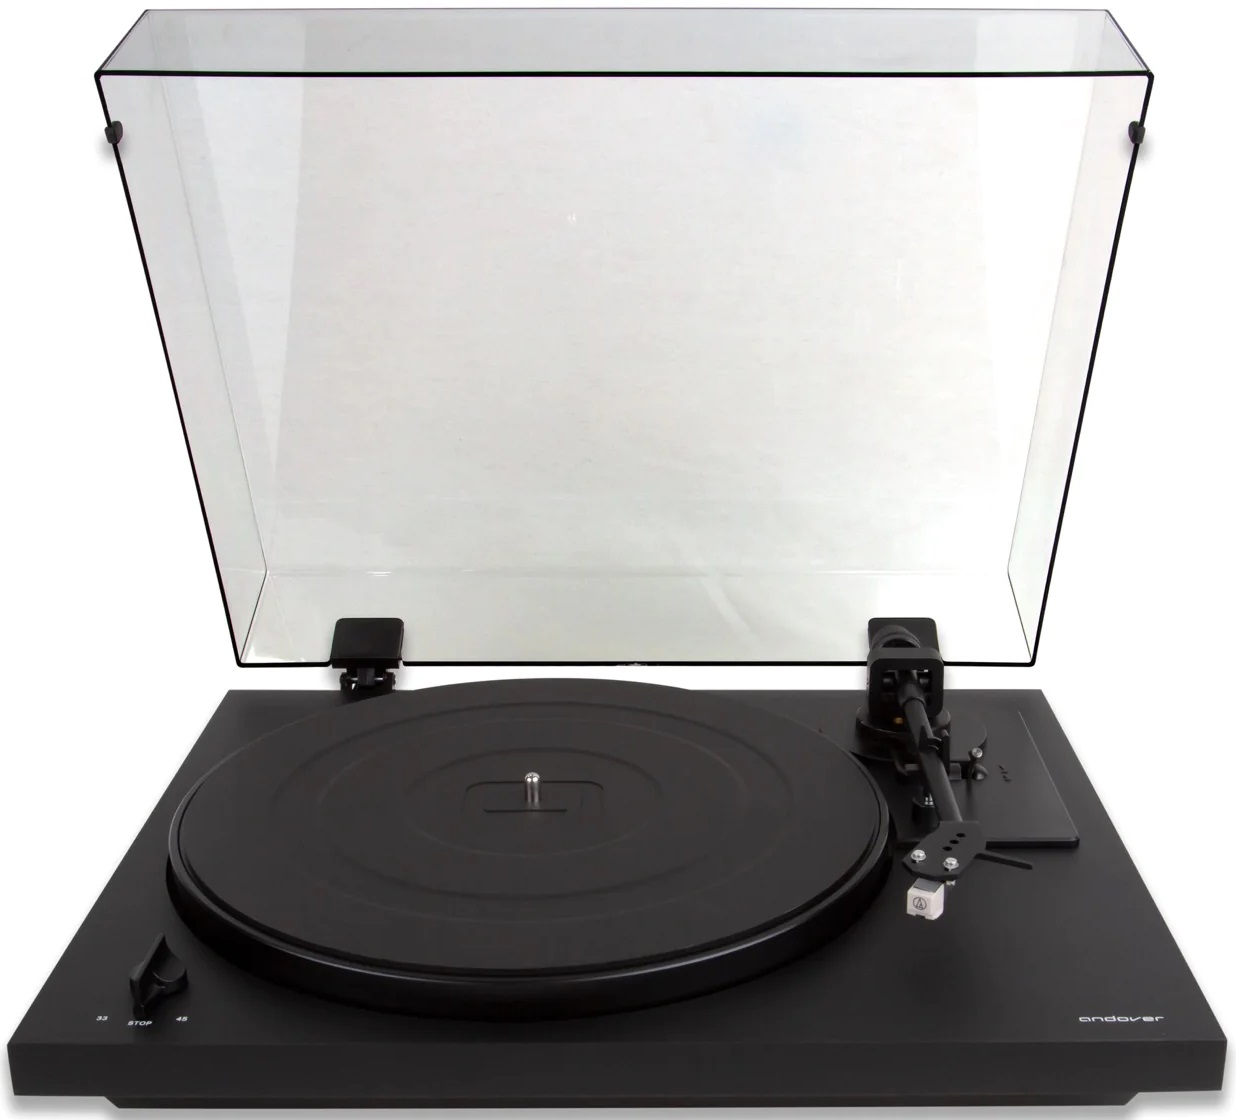 andover-audio-spindeck-2-turntable-with-cartridge-black